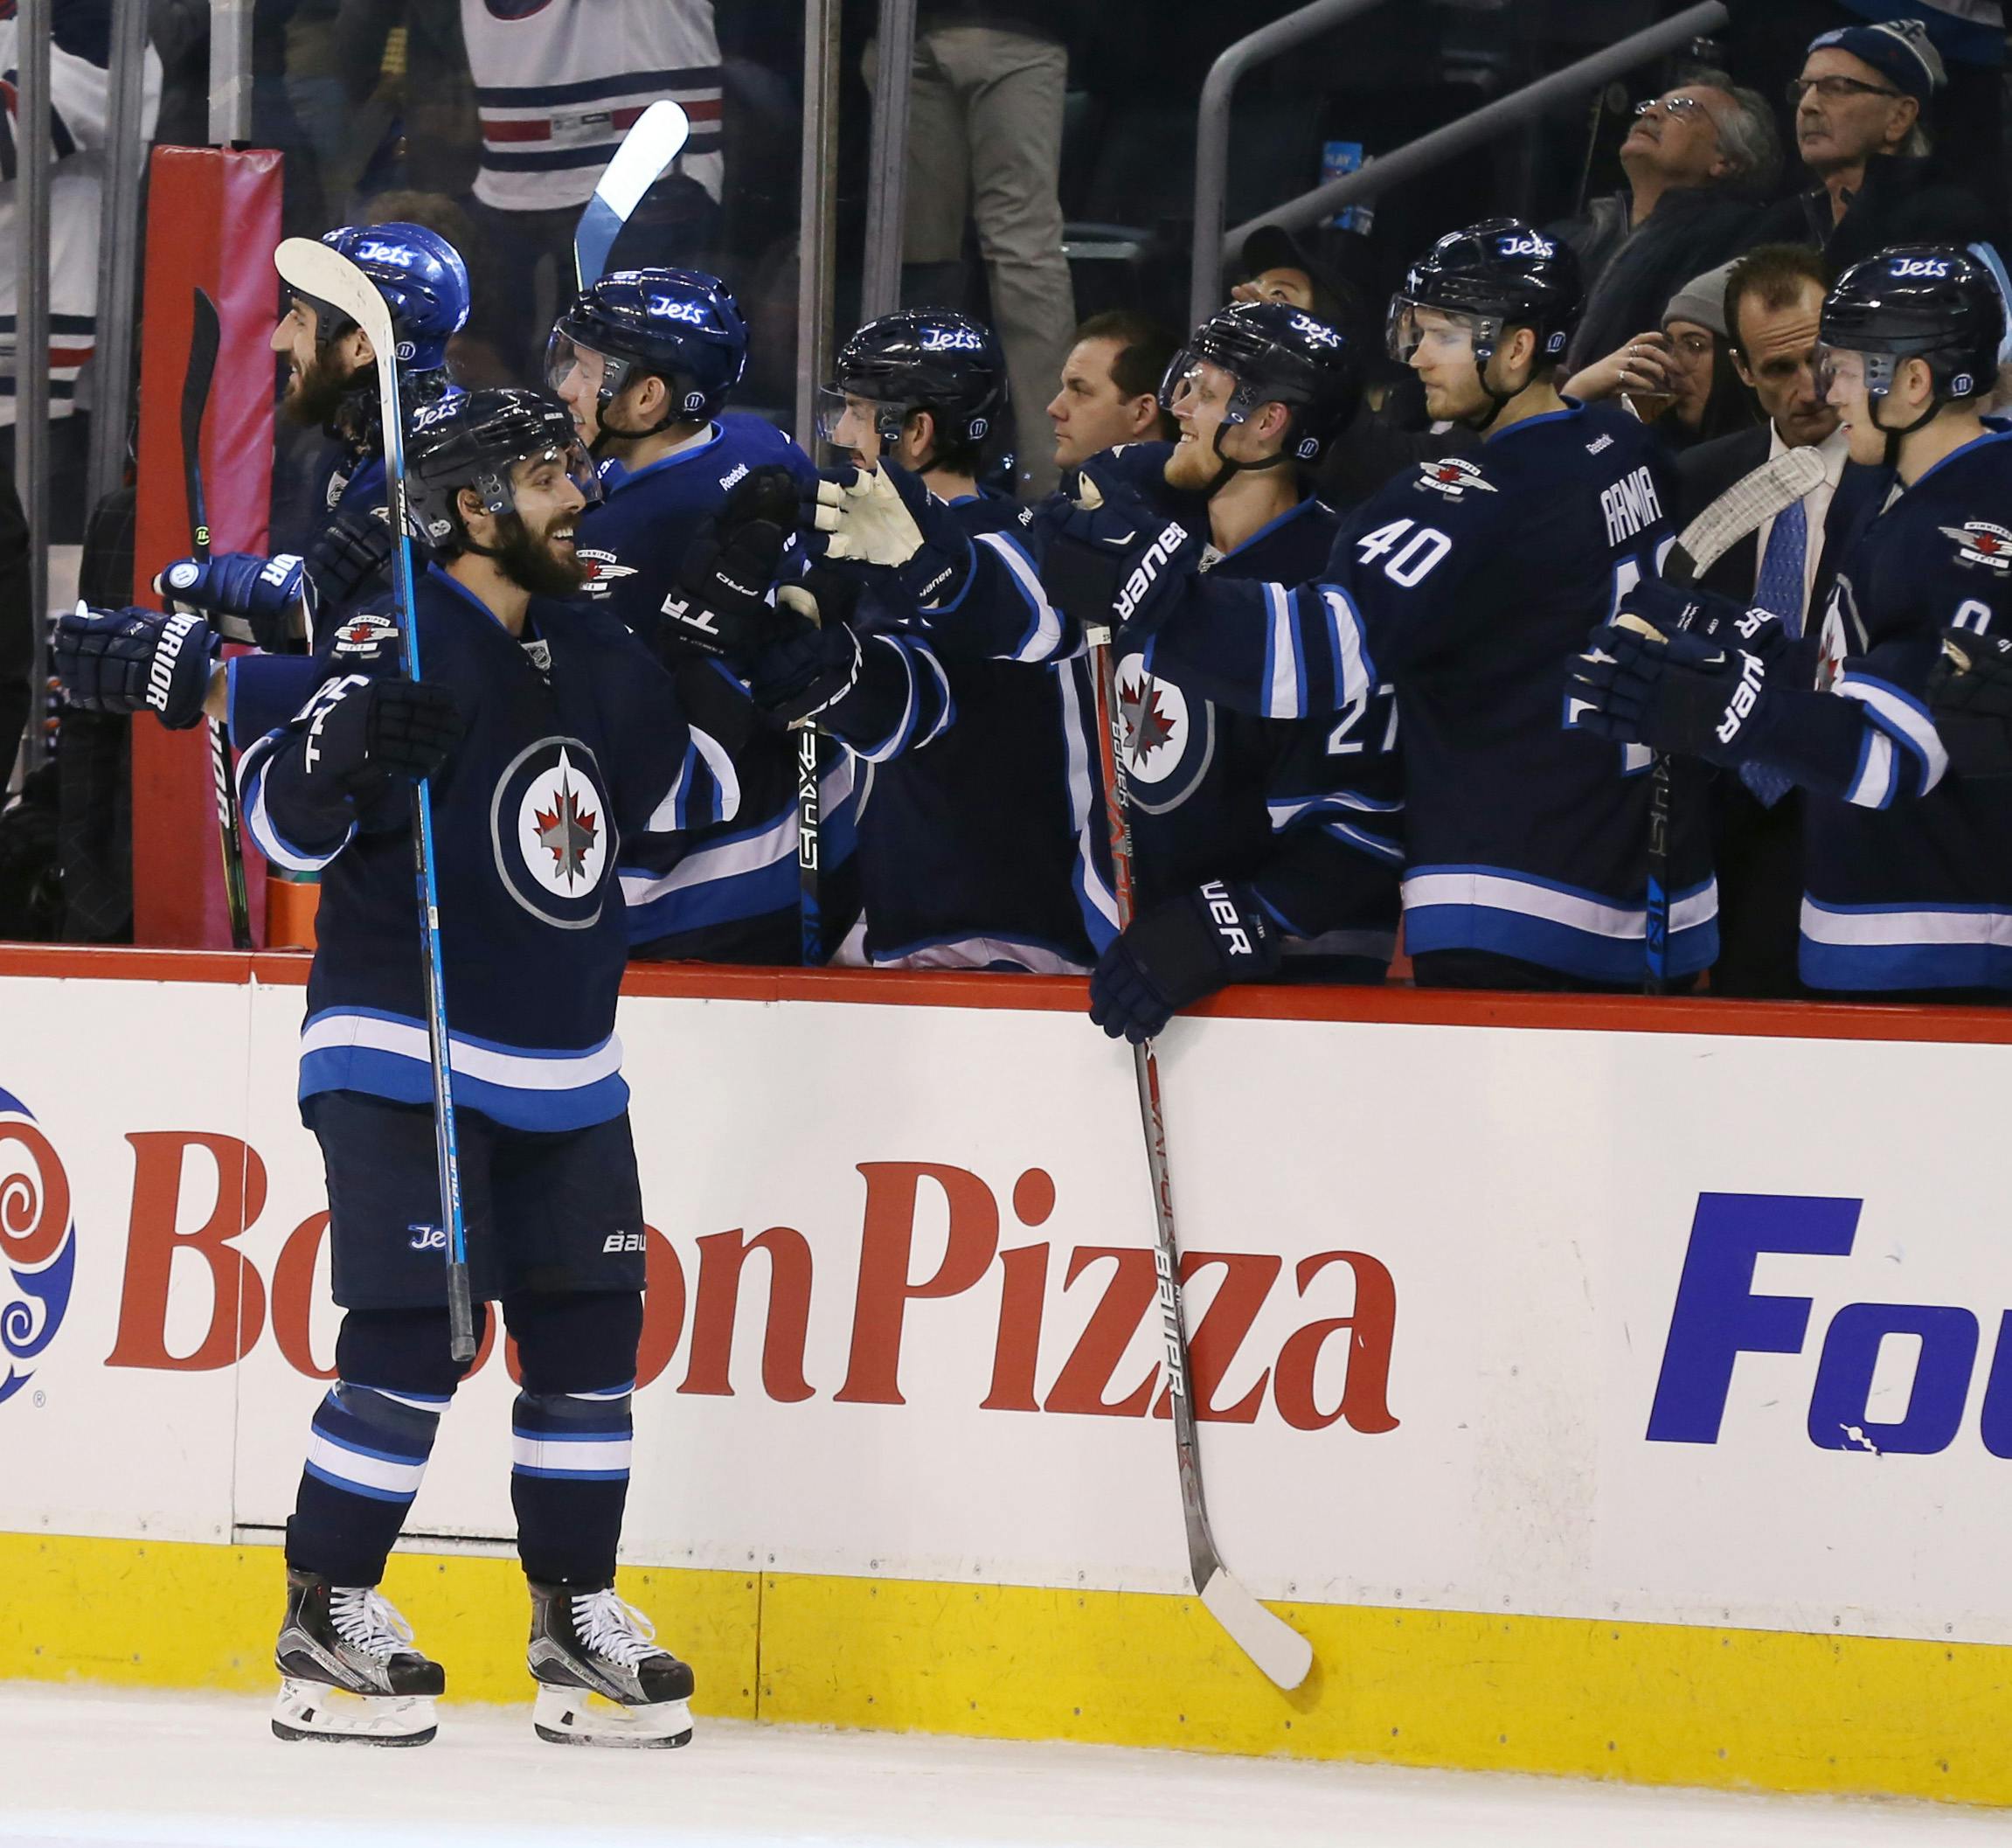 Mar 21, 2017; Winnipeg, Manitoba, CAN; Winnipeg Jets center Mathieu Perreault (85) celebrates with teammates after scoring a goal during the third period against the Philadelphia Flyers at MTS Centre. Winnipeg Jets win 3-2. Mandatory Credit: Bruce Fedyck-USA TODAY Sports